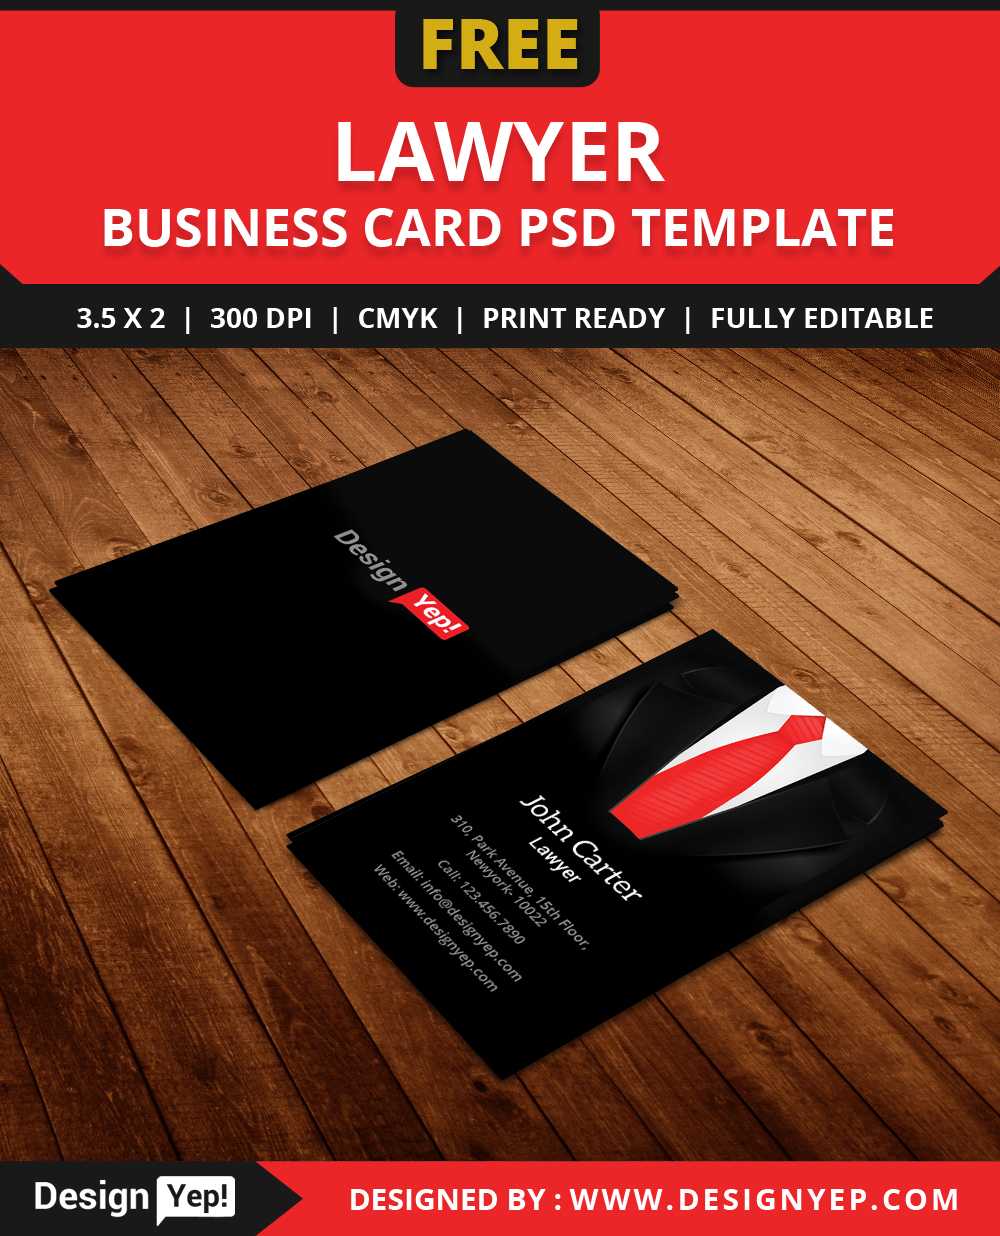 Free Lawyer Business Card Template Psd – Designyep With Call Card Templates